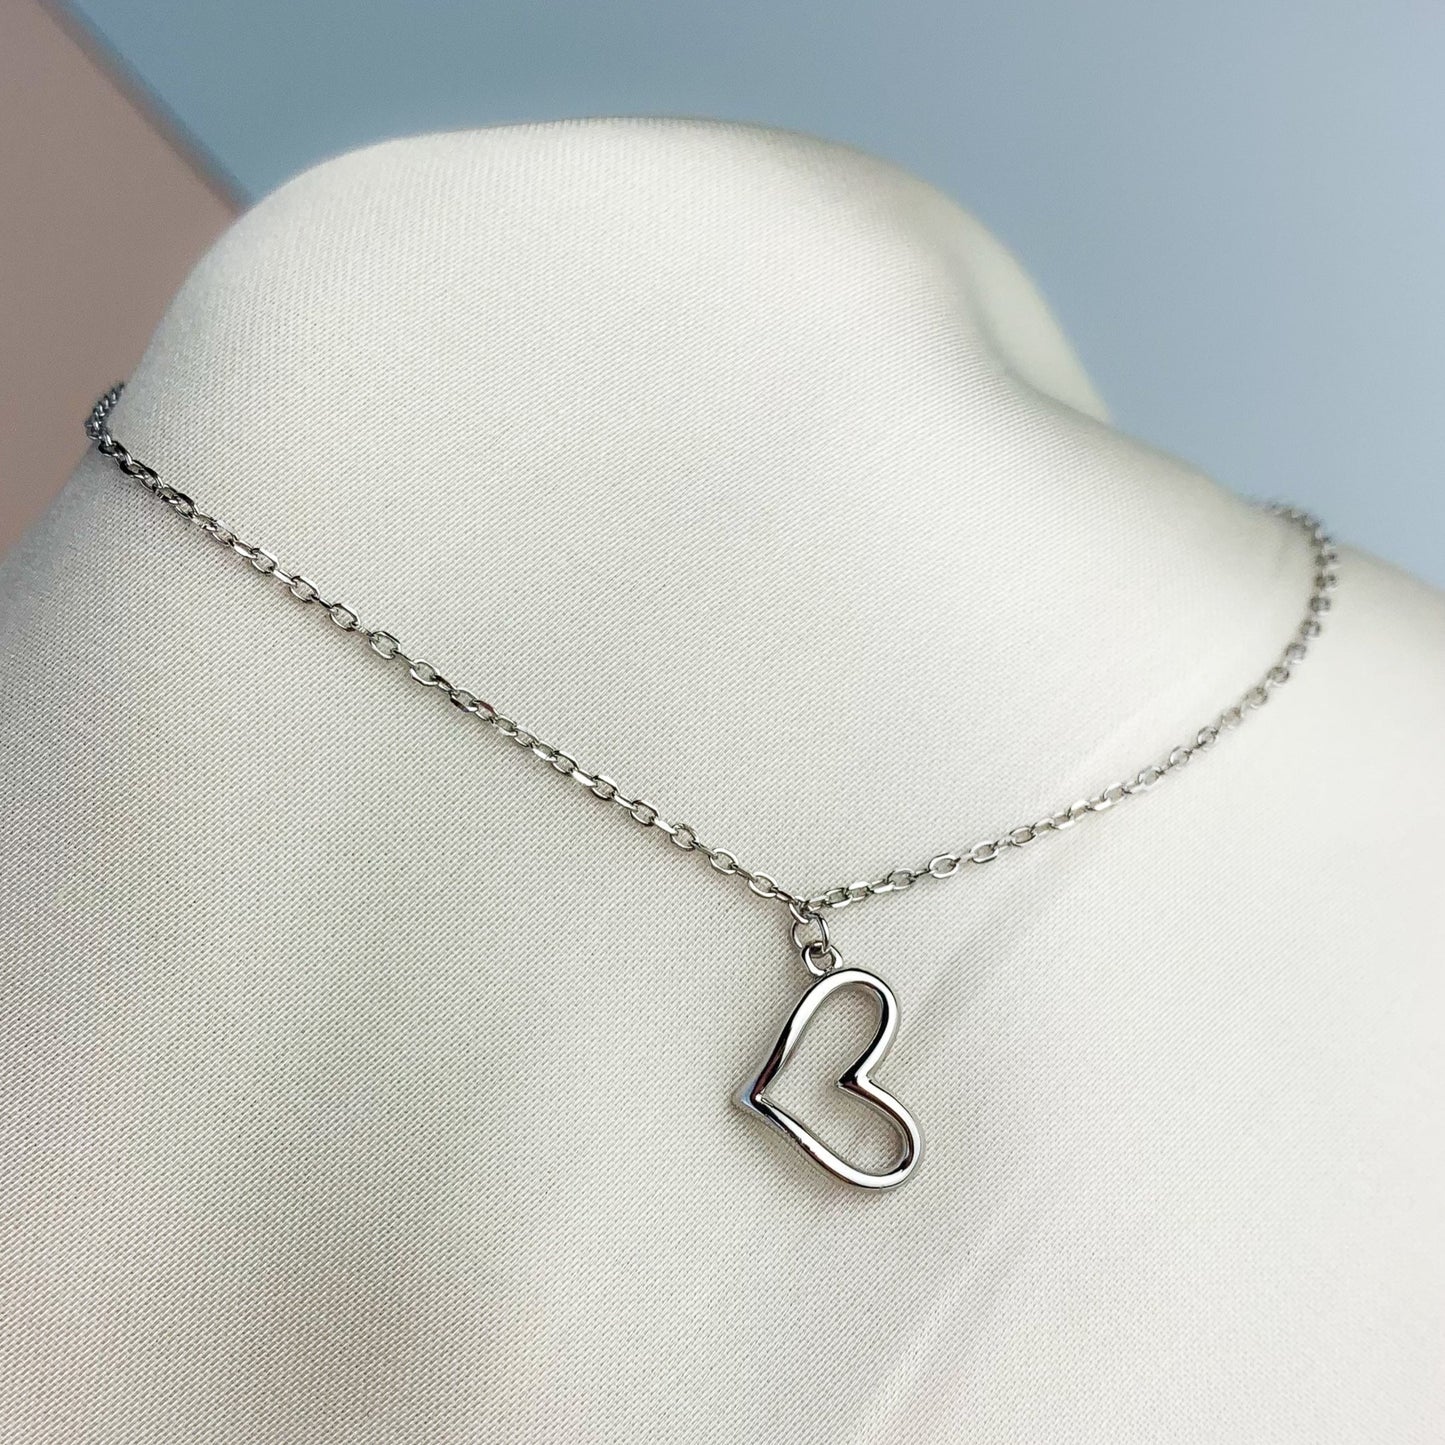 Dangle Heart Charm Chain Anklet